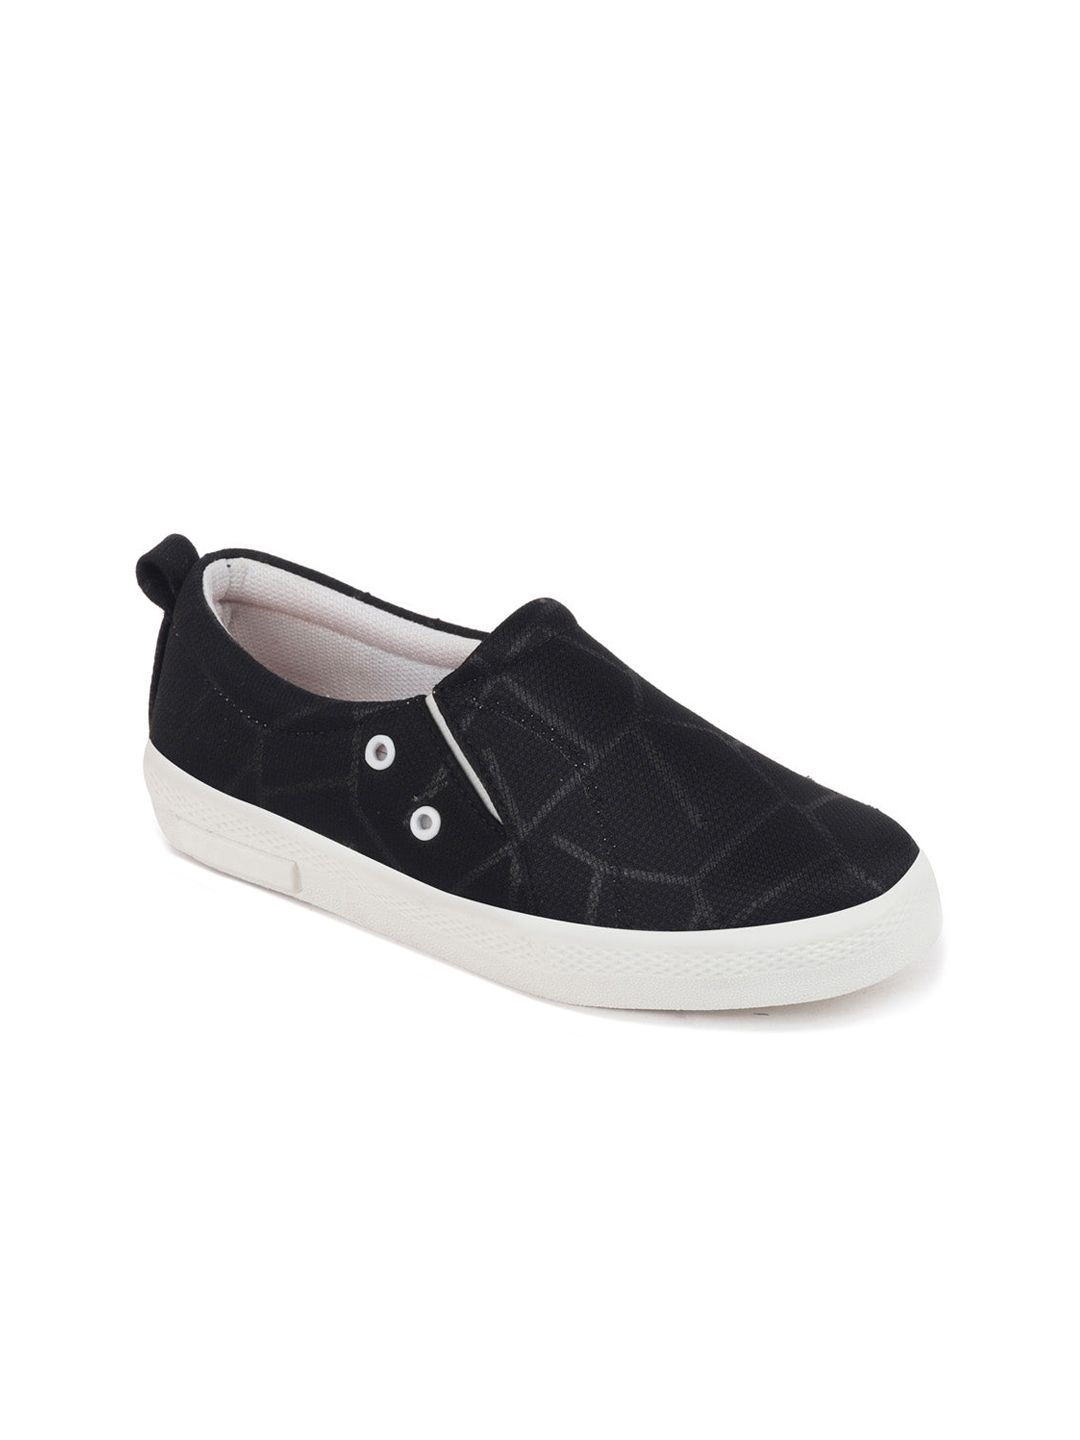 FAUSTO Women Black Canvas Slip-On Sneakers Price in India